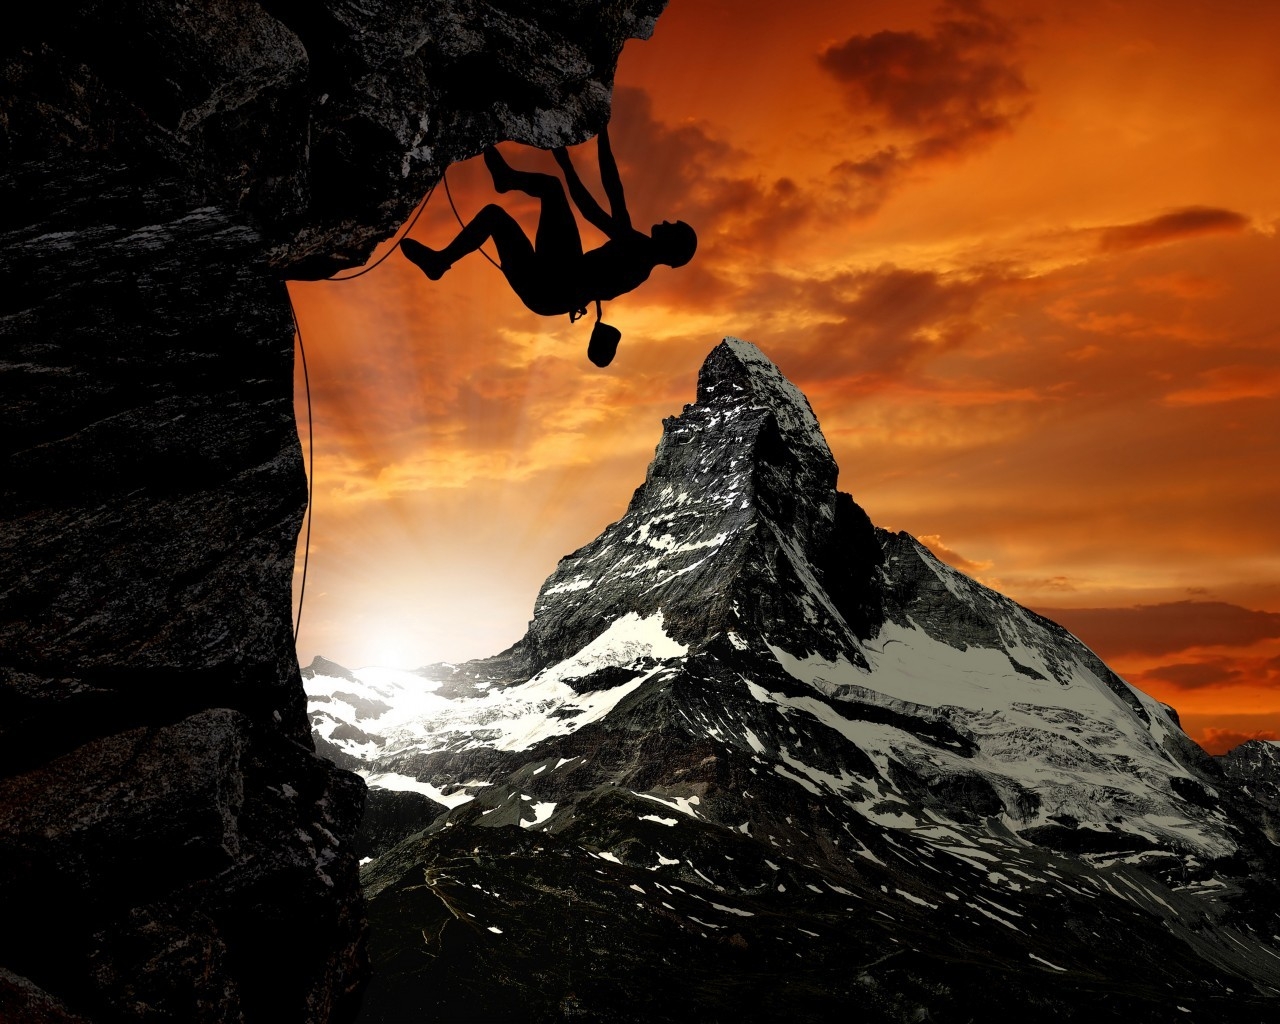 Mountain Climber for 1280 x 1024 resolution